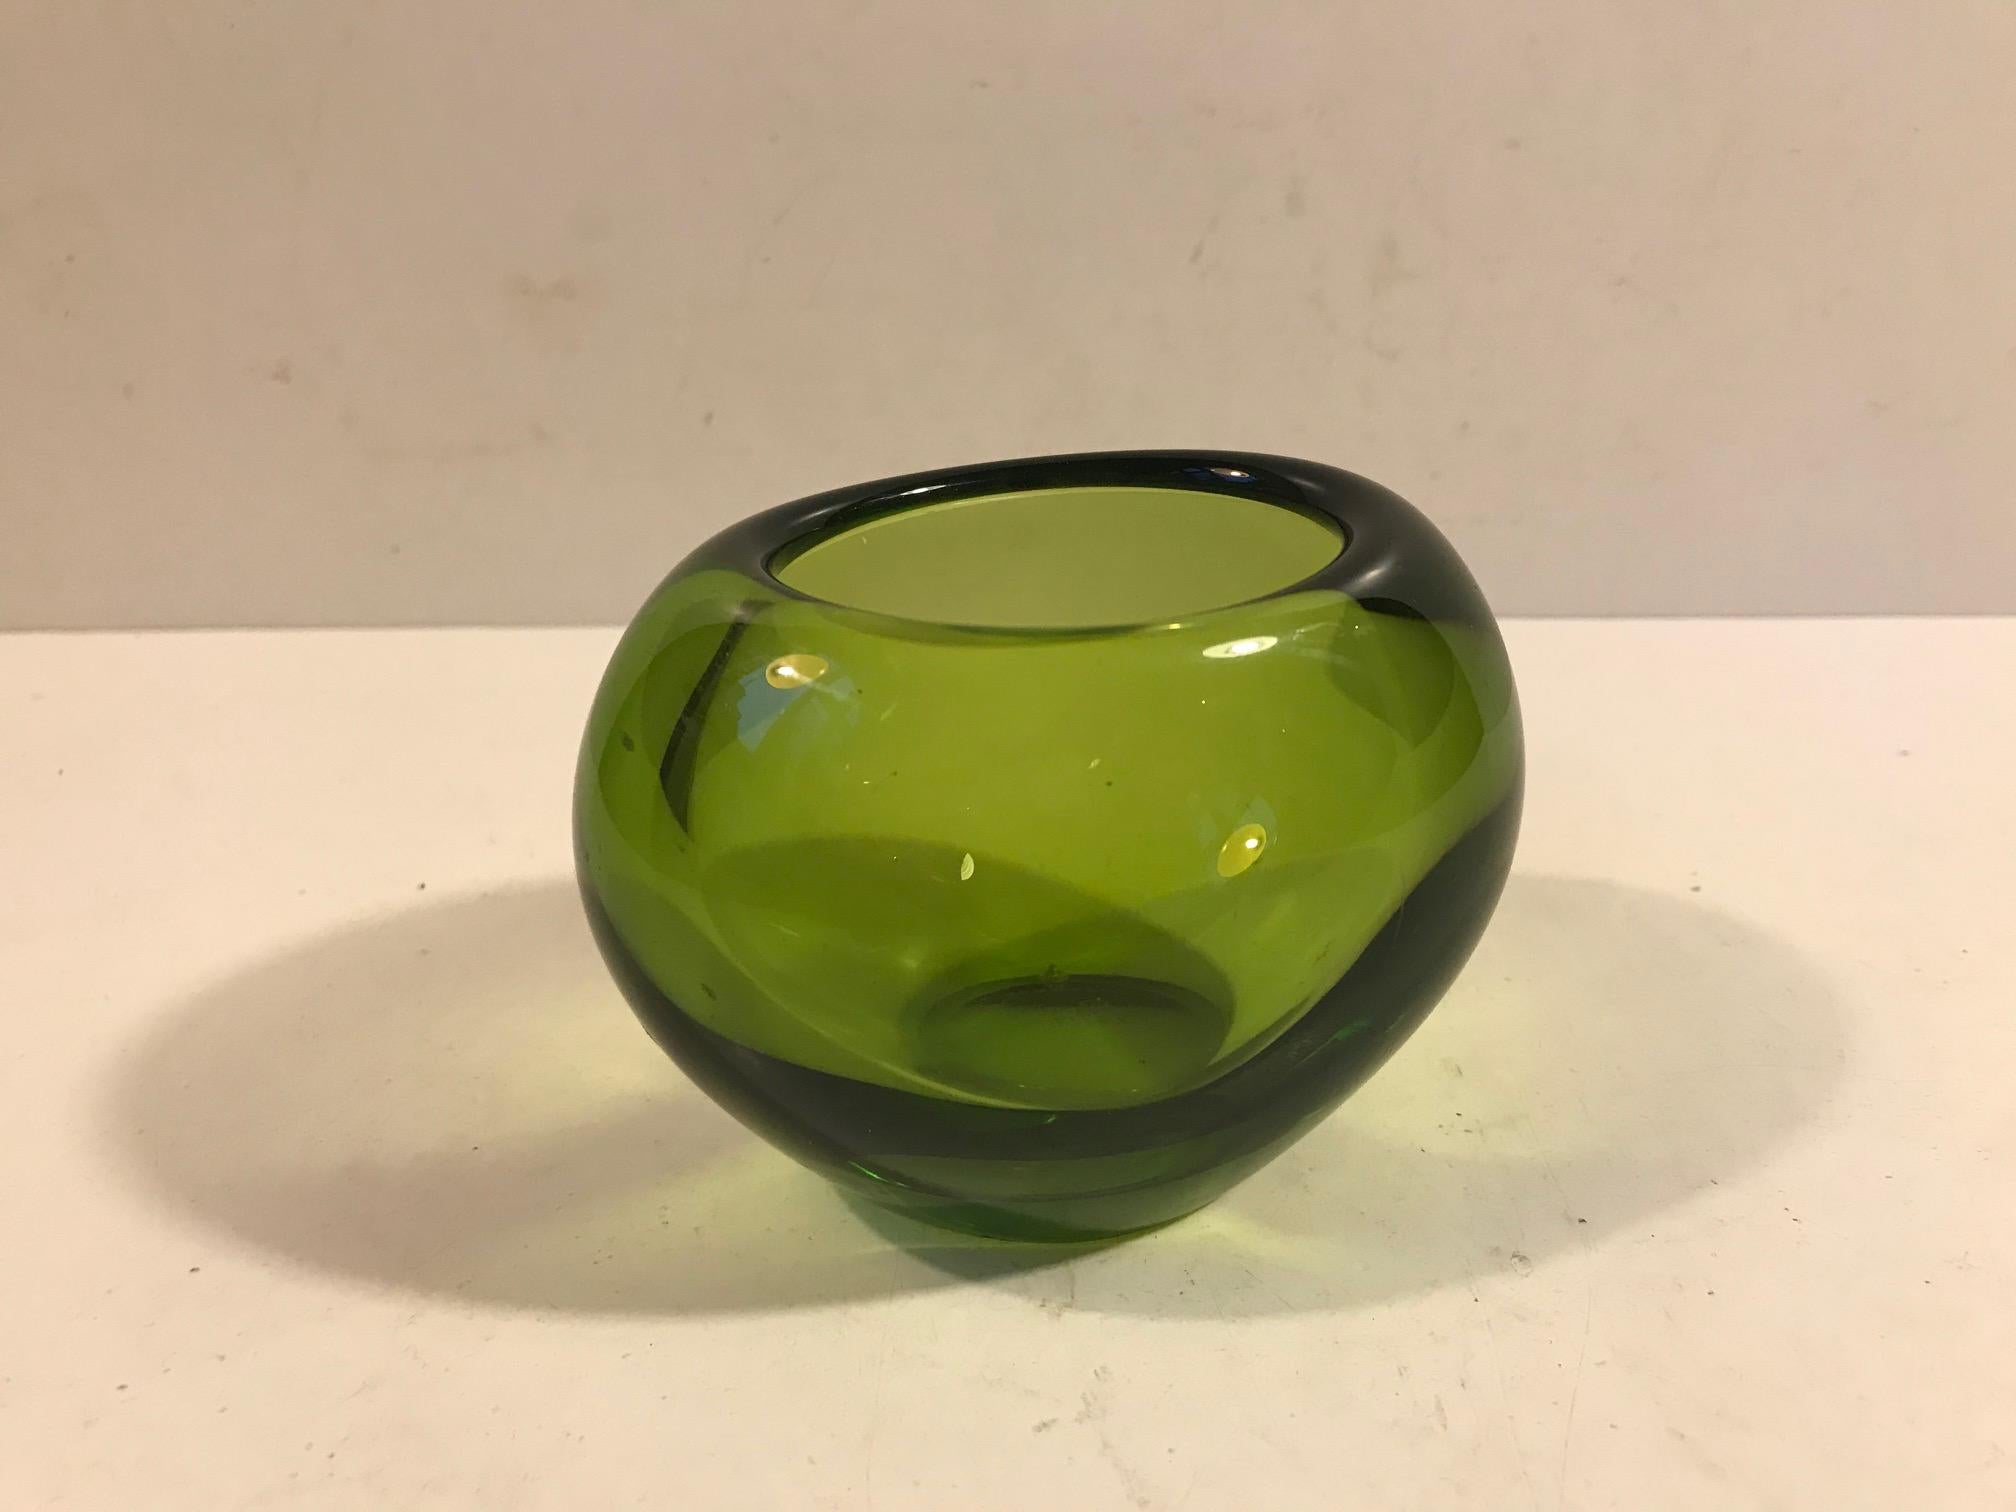 A 1950s Holmegaard Per Lutken 'May' green heart shaped vase, signed to base 'Holmegaard', numbered and with Per Lütken initials.